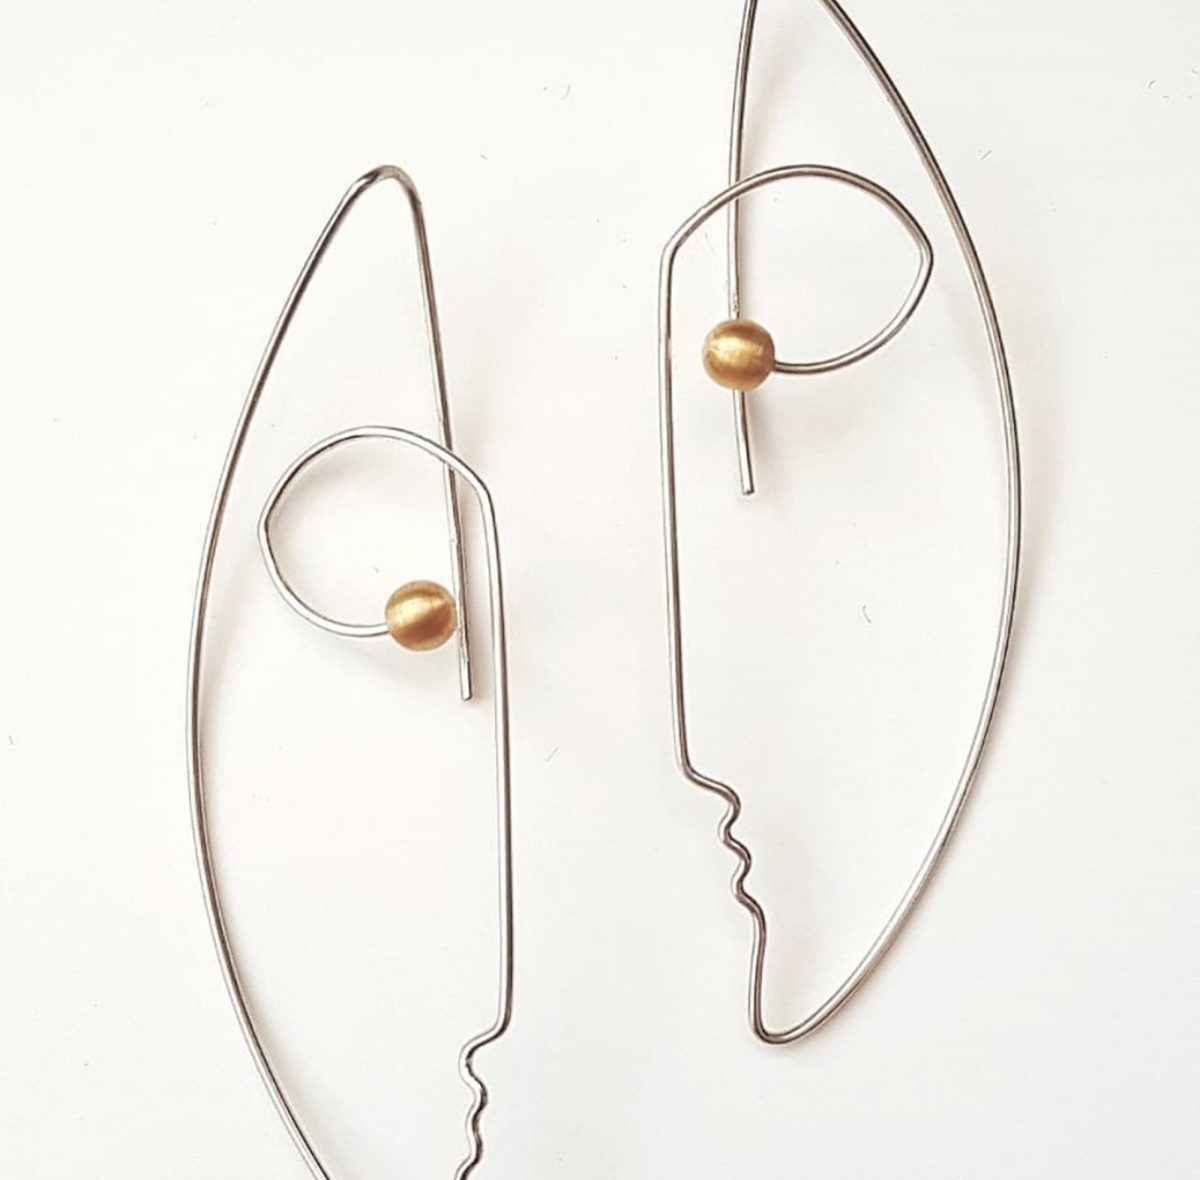 Silver Wire Face Silhouette Earrings with Pearls, Minimalist Jewelry